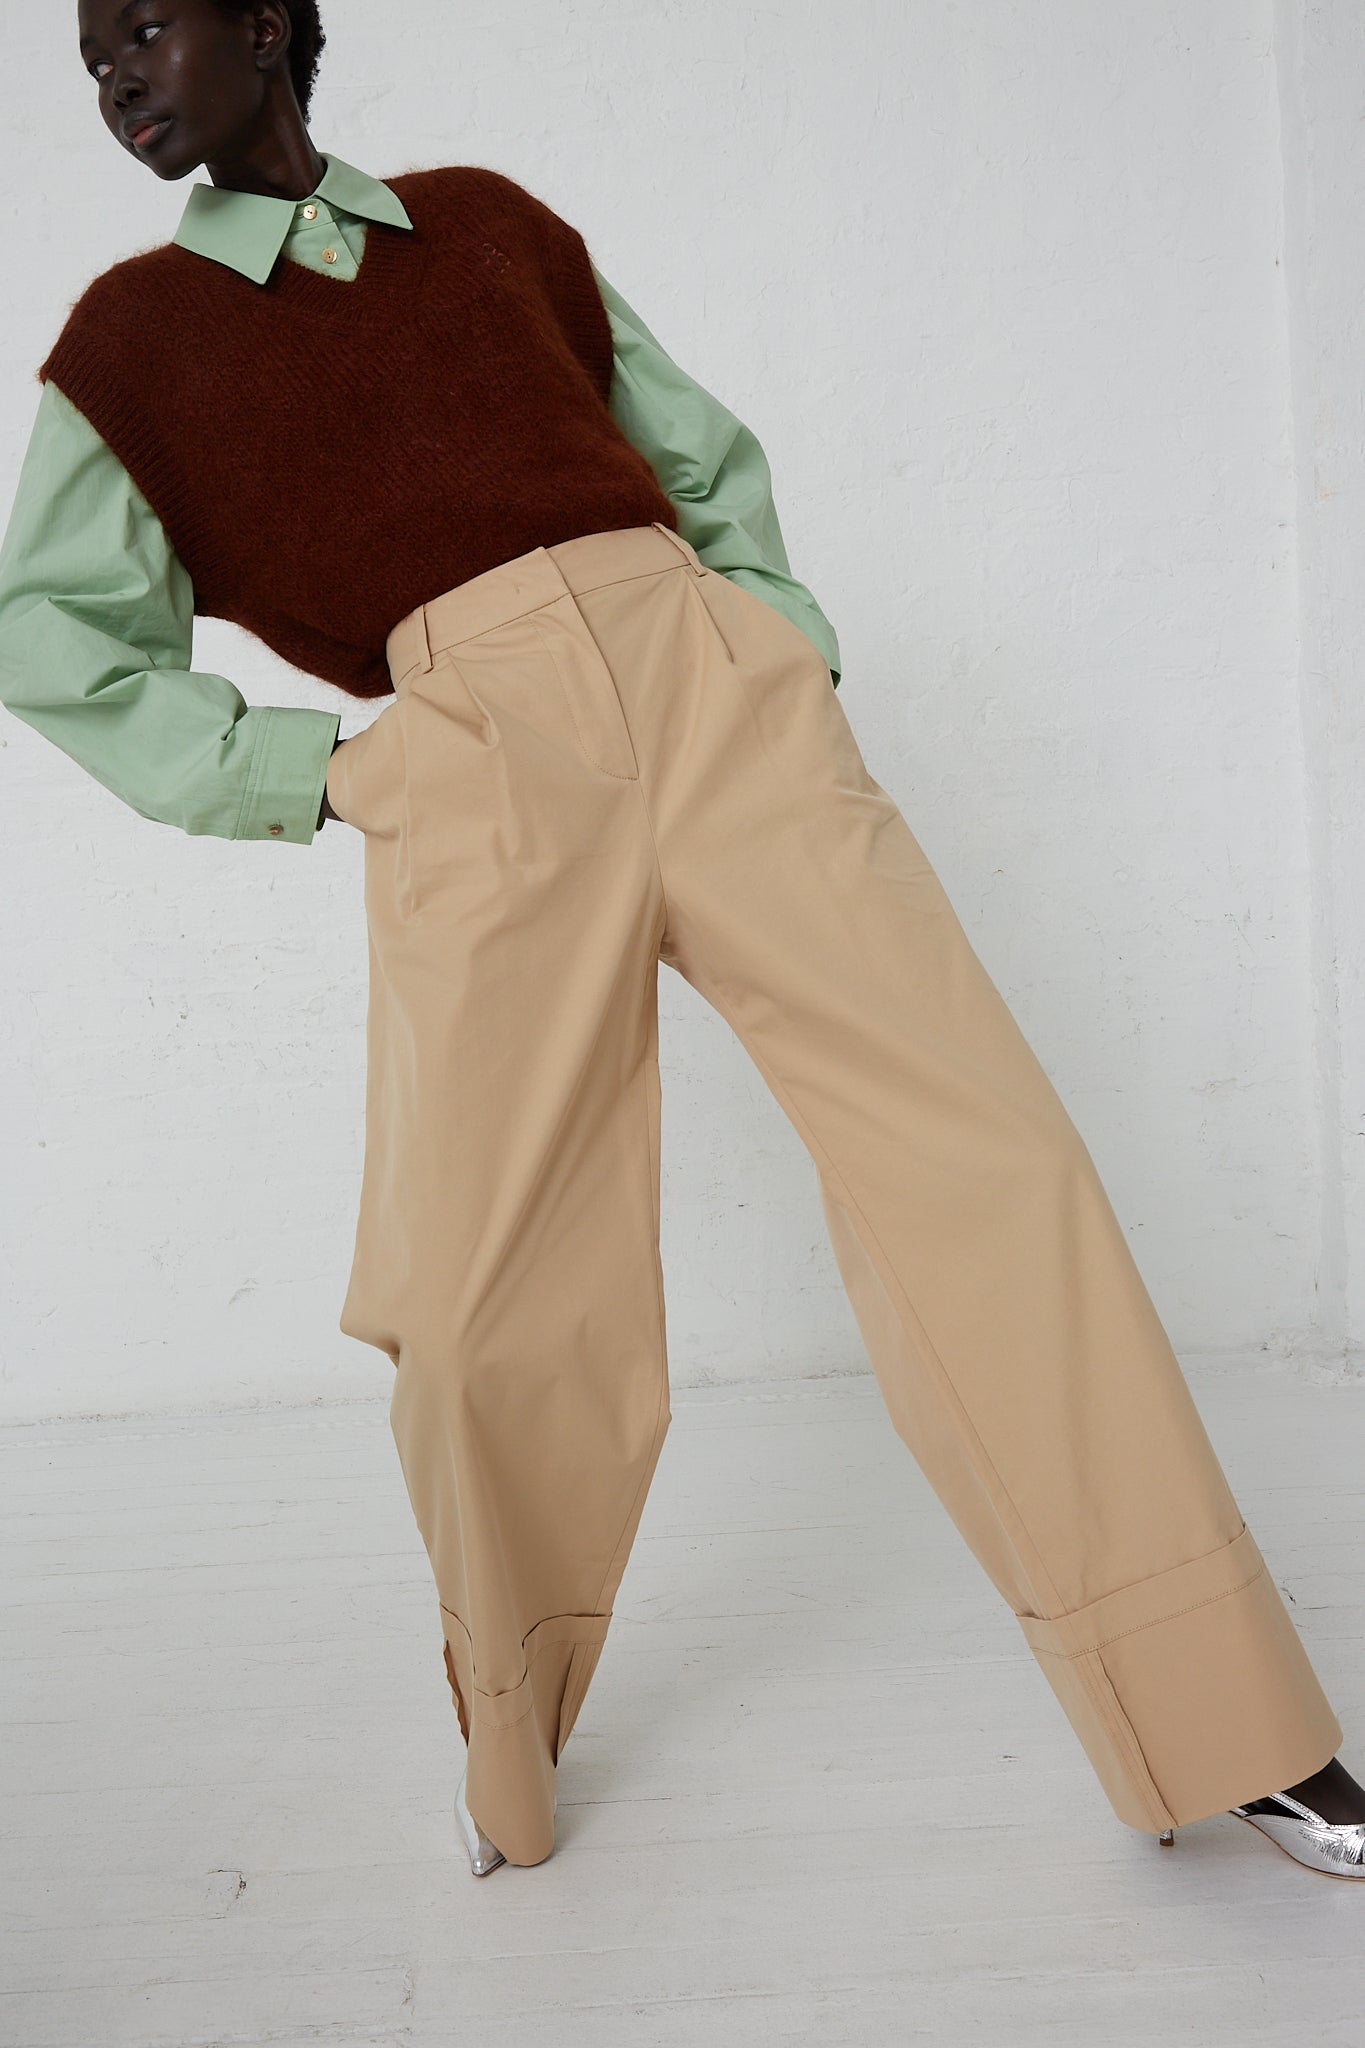 A woman in a brown sweater and beige pants wearing Rejina Pyo's Cotton Blend Macie Trouser in Tan. Model is leaning backwards.